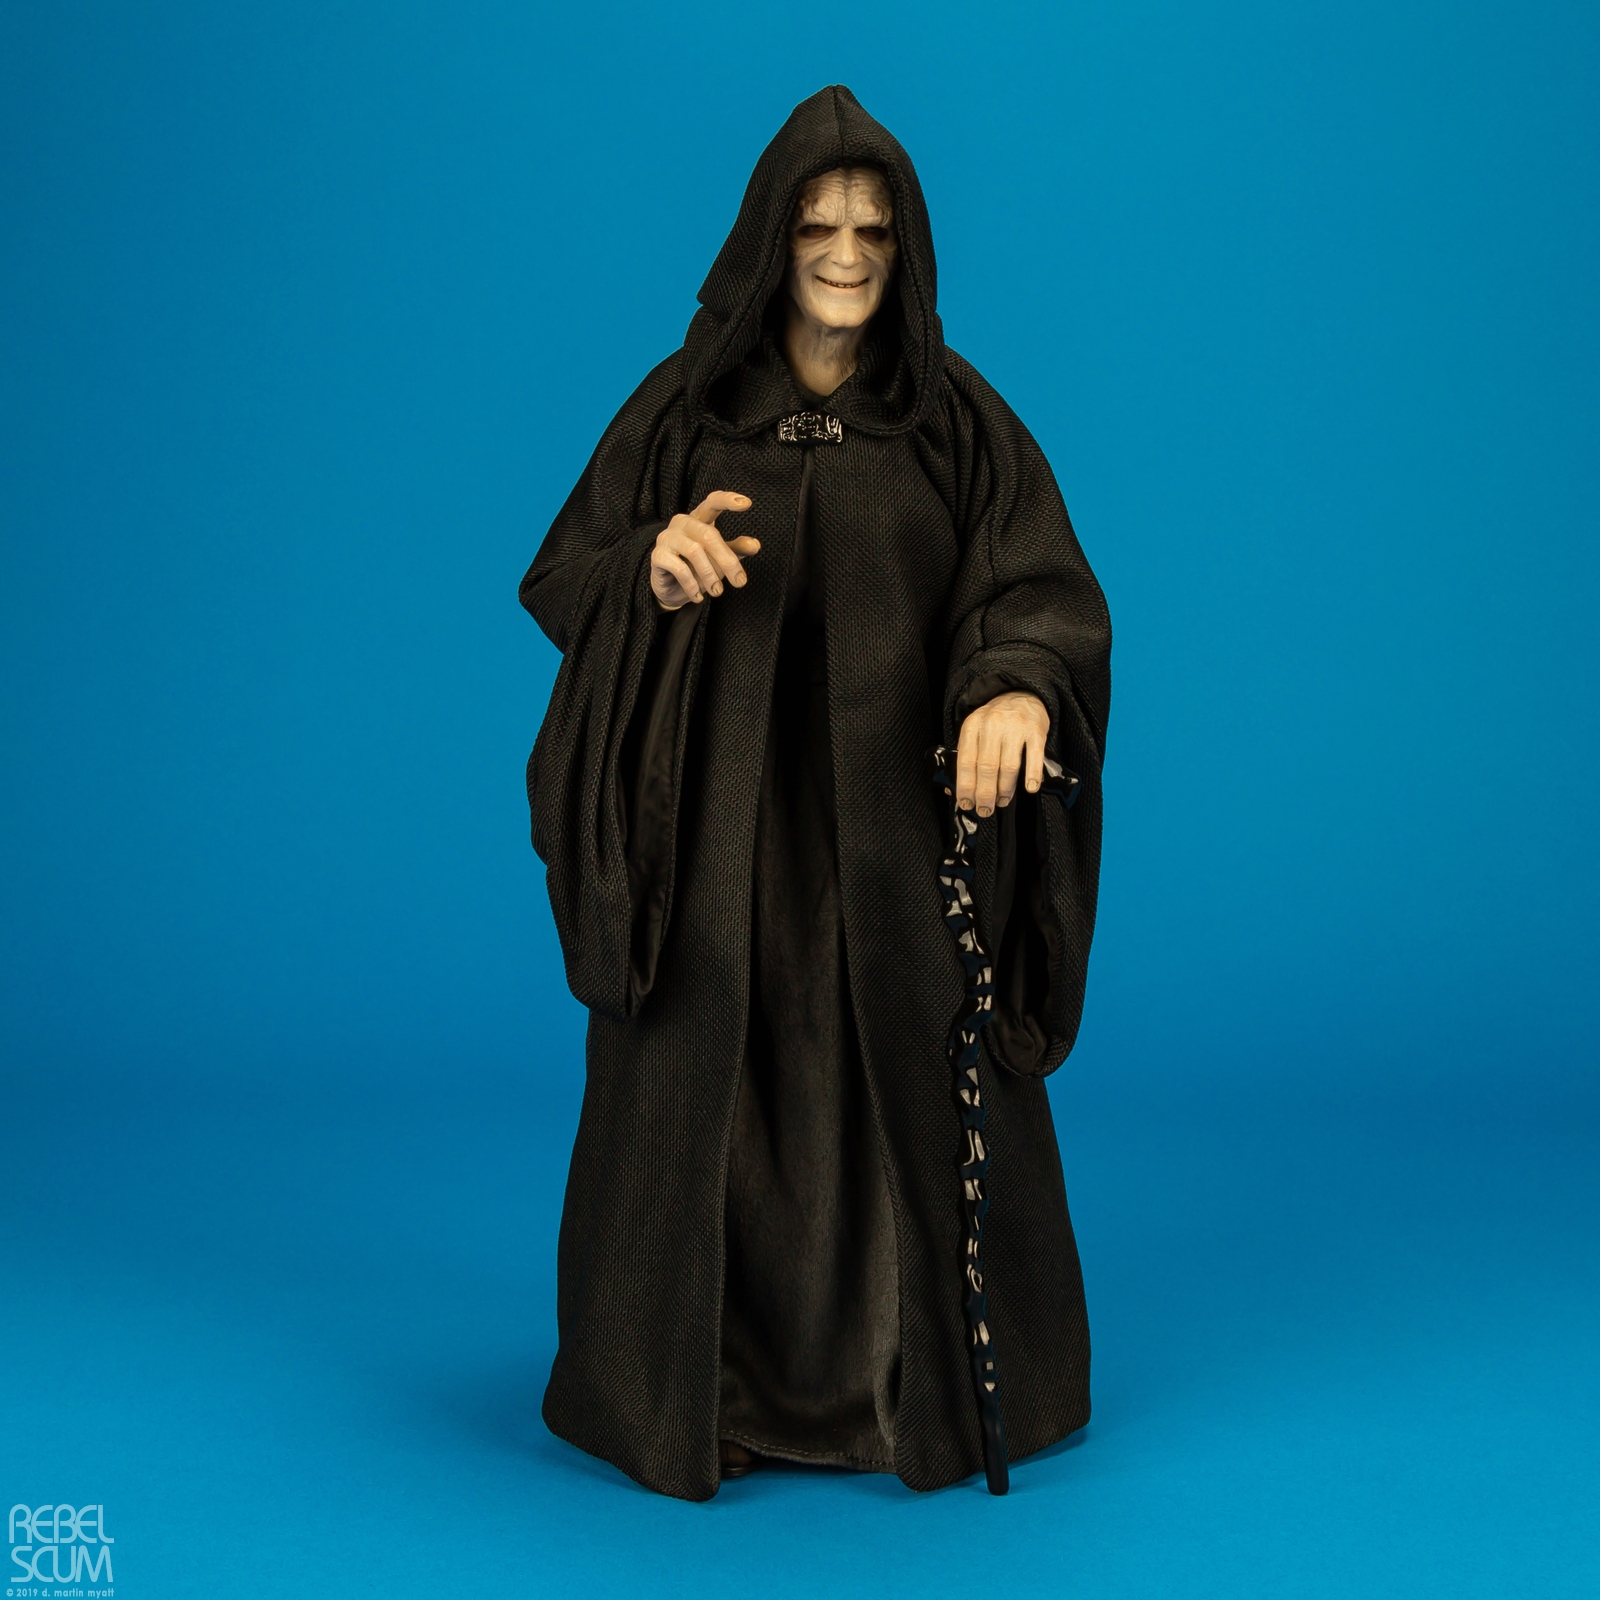 Emperor-Palpatine-Deluxe-Version-MMS468-Hot-Toys-001.jpg